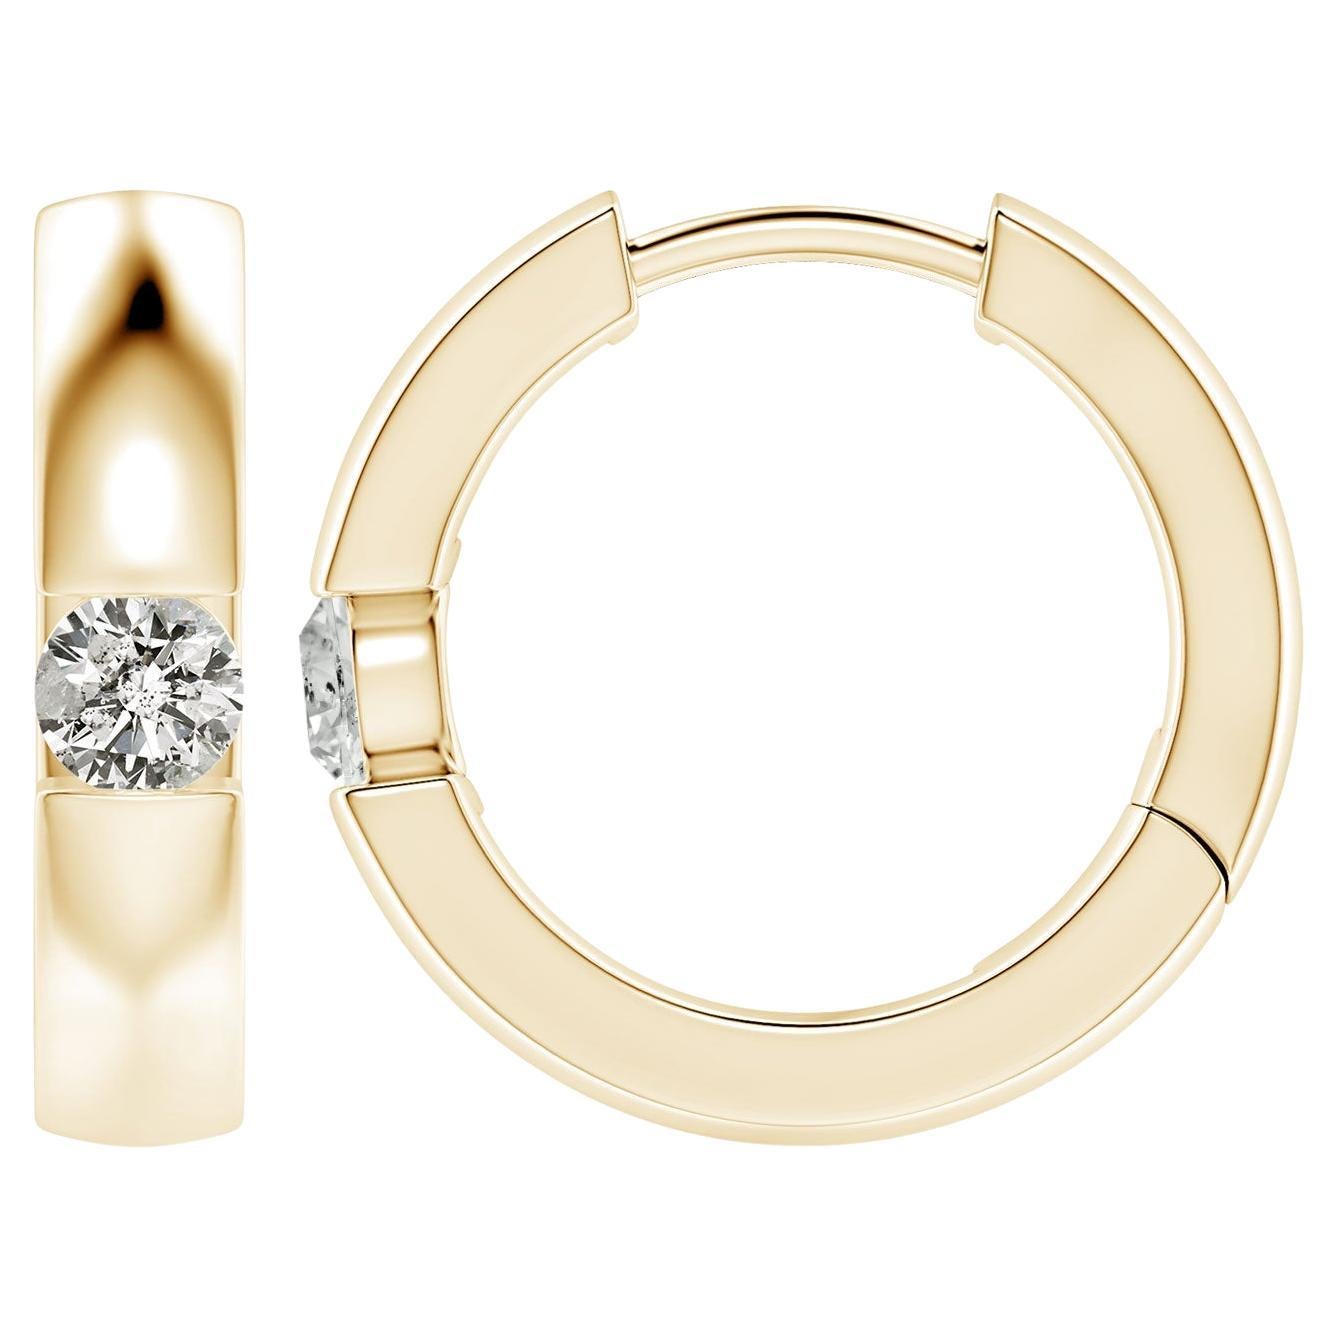 Natural Round 0.23ct Diamond Hoop Earrings in 14K Yellow Gold (Color-K)